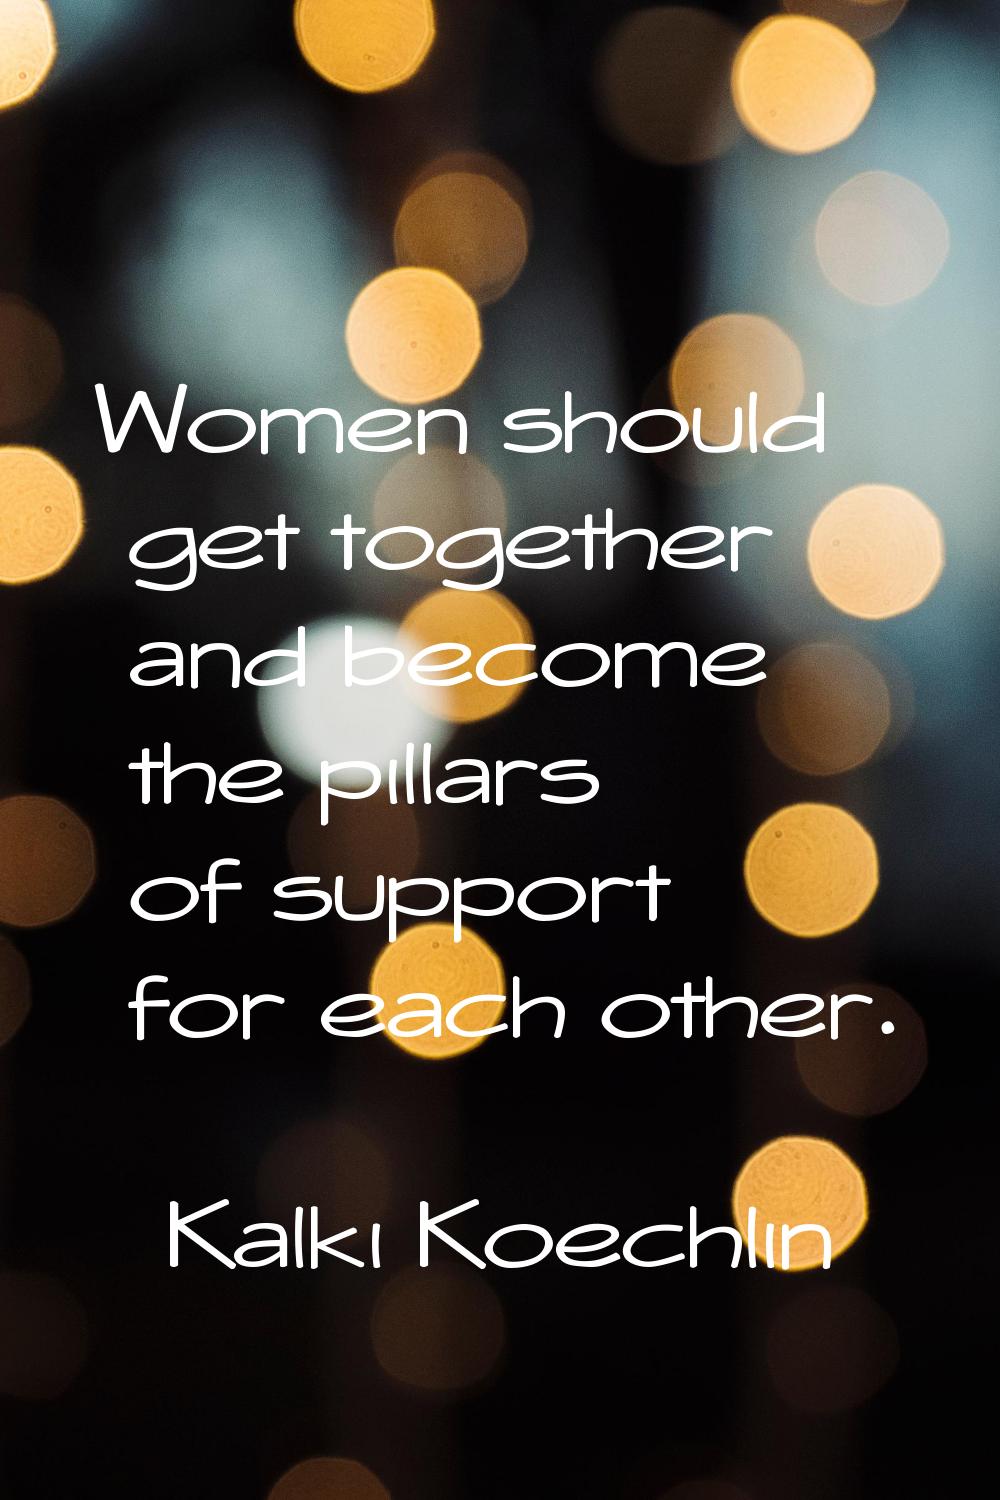 Women should get together and become the pillars of support for each other.